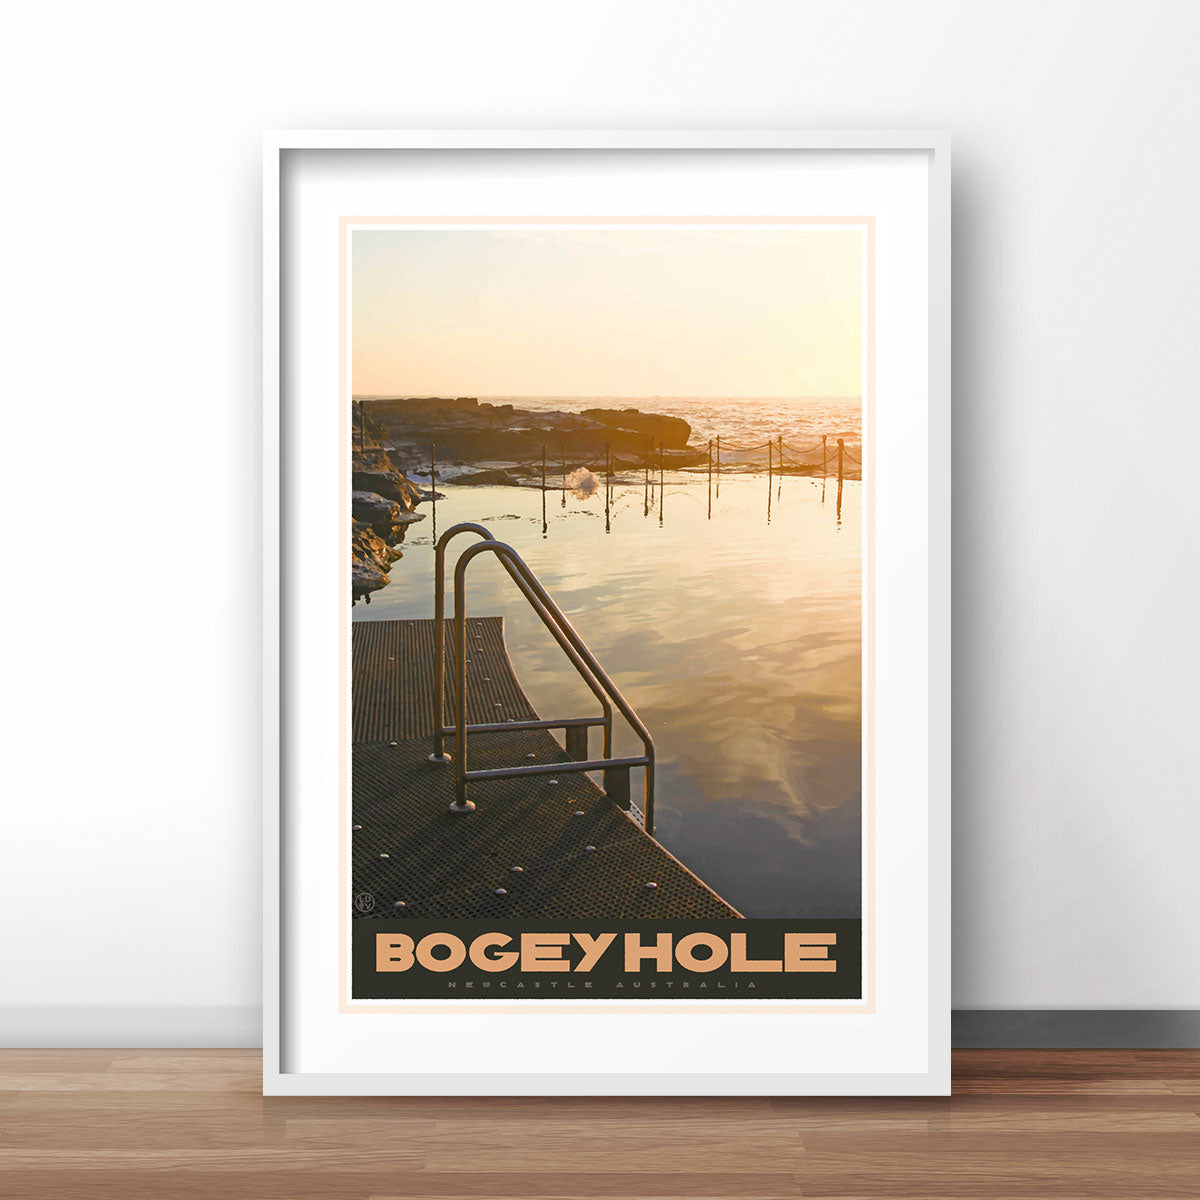 Newcastle Bogey Hole vintage travel style print by places we luv